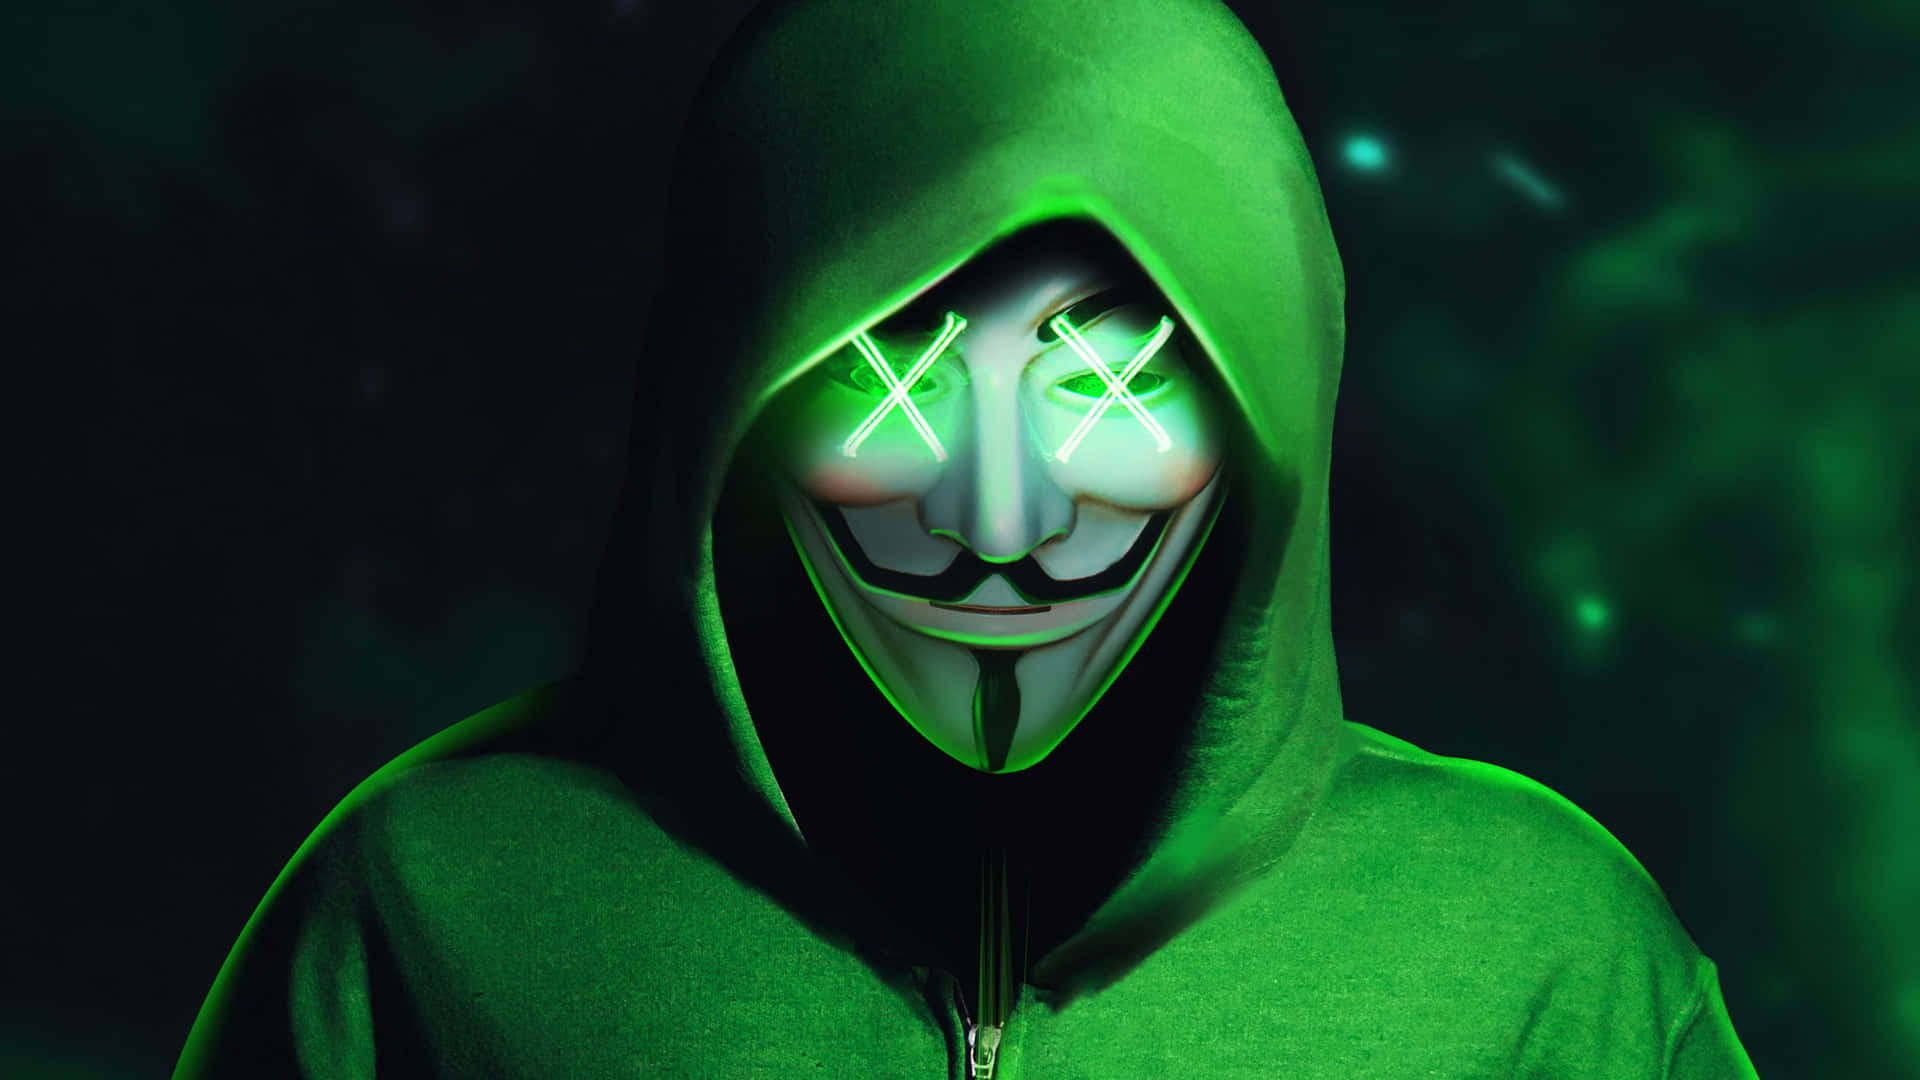 Green 4k Mask Anonymous Hacker Background